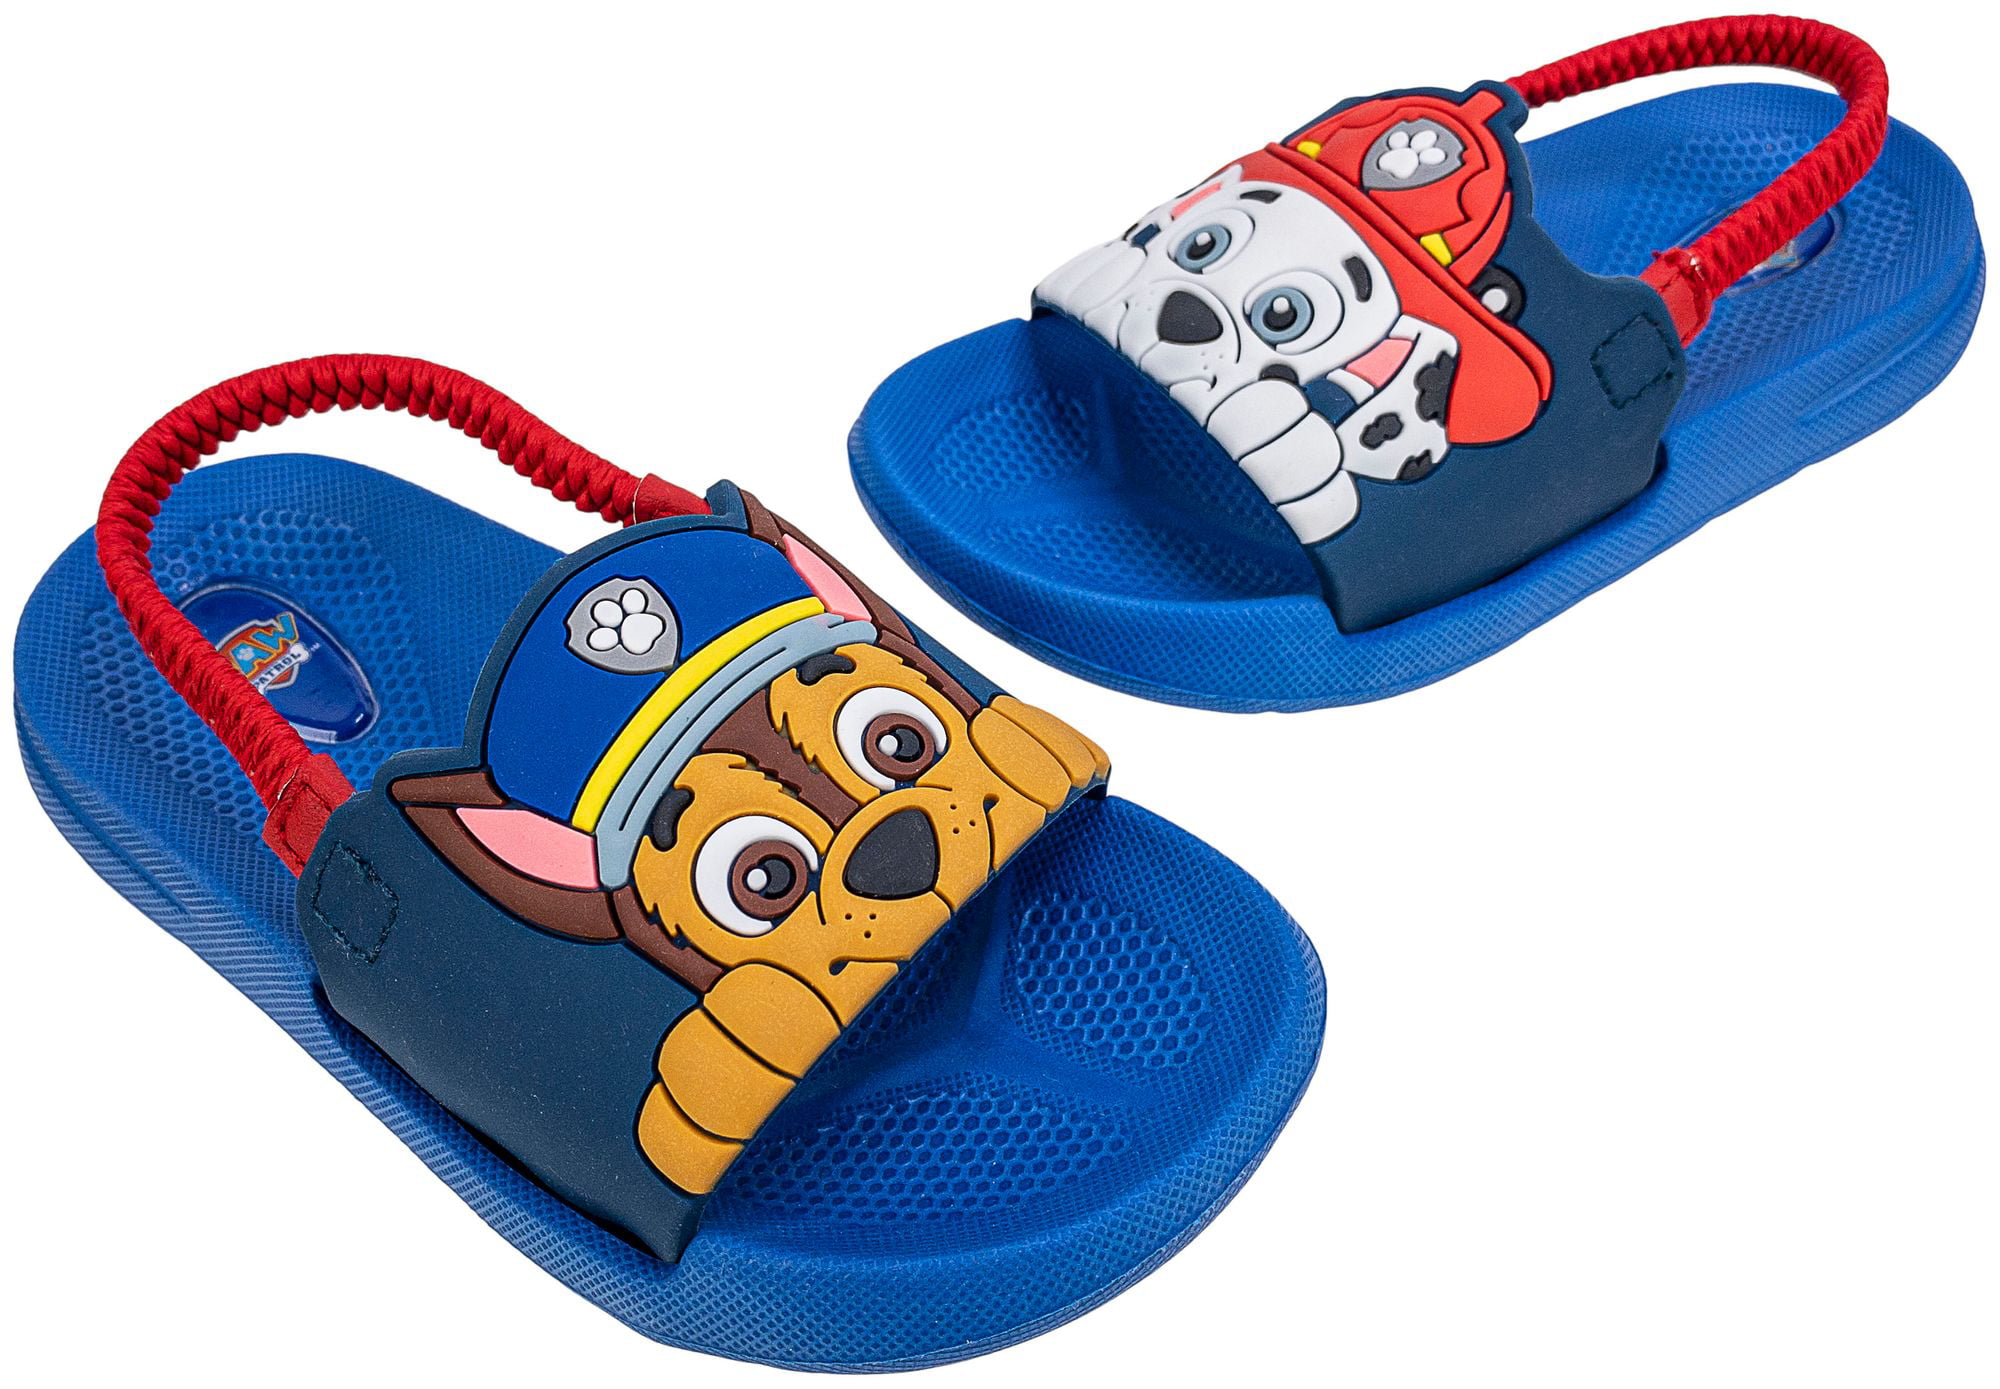 Paw Patrol Chase & Marshall Blue Childrens Slip On Clogs Beach Sandals Shoes 